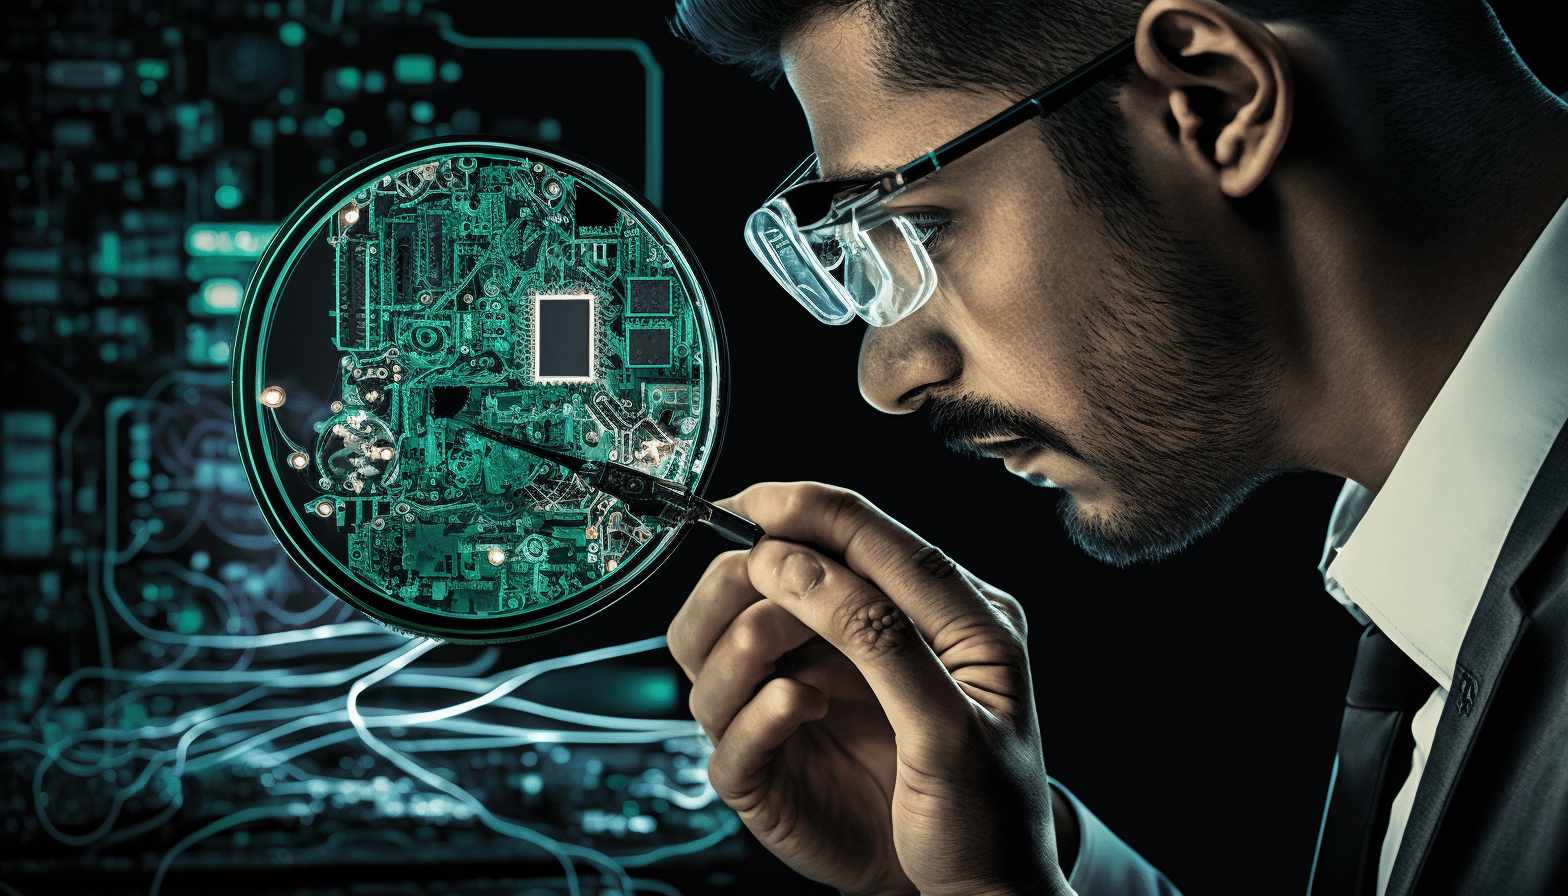 An image of a security professional examining the inner workings of an IoT device, with various hardware components and circuit boards visible. 